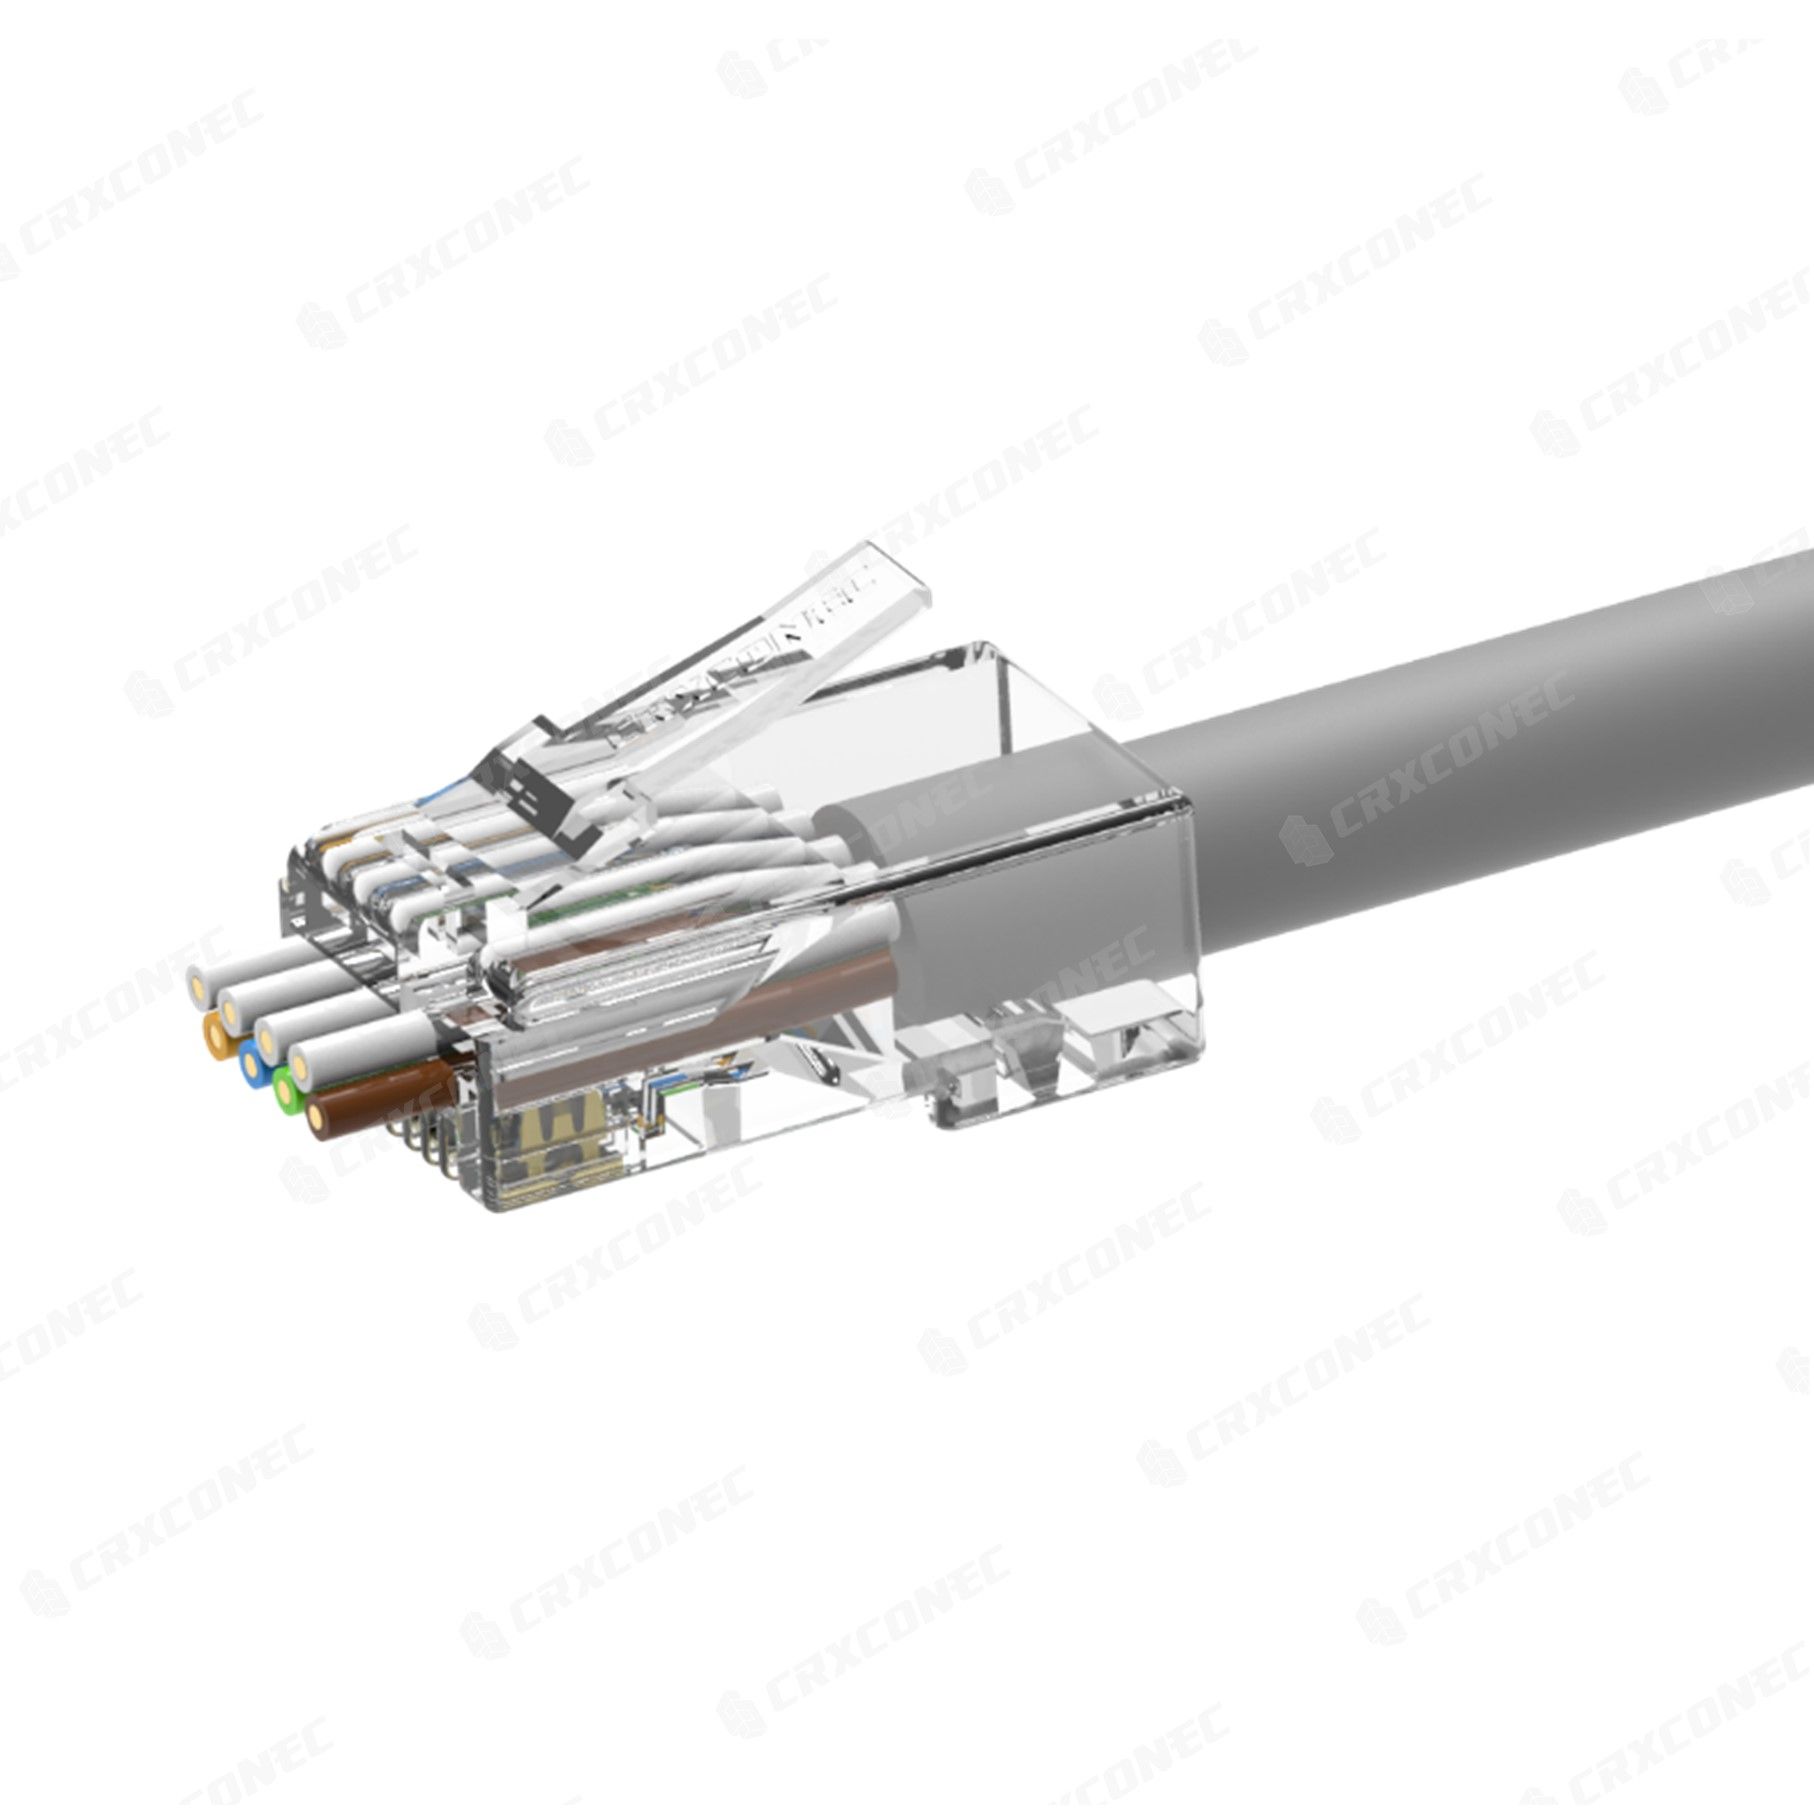 Cat6A UTP Easy Pass Through RJ45 Connector Wire Hole 4 Up / 4 Down   Advanced Fiber Cabling & Data Center Infrastructure from CRXCONEC